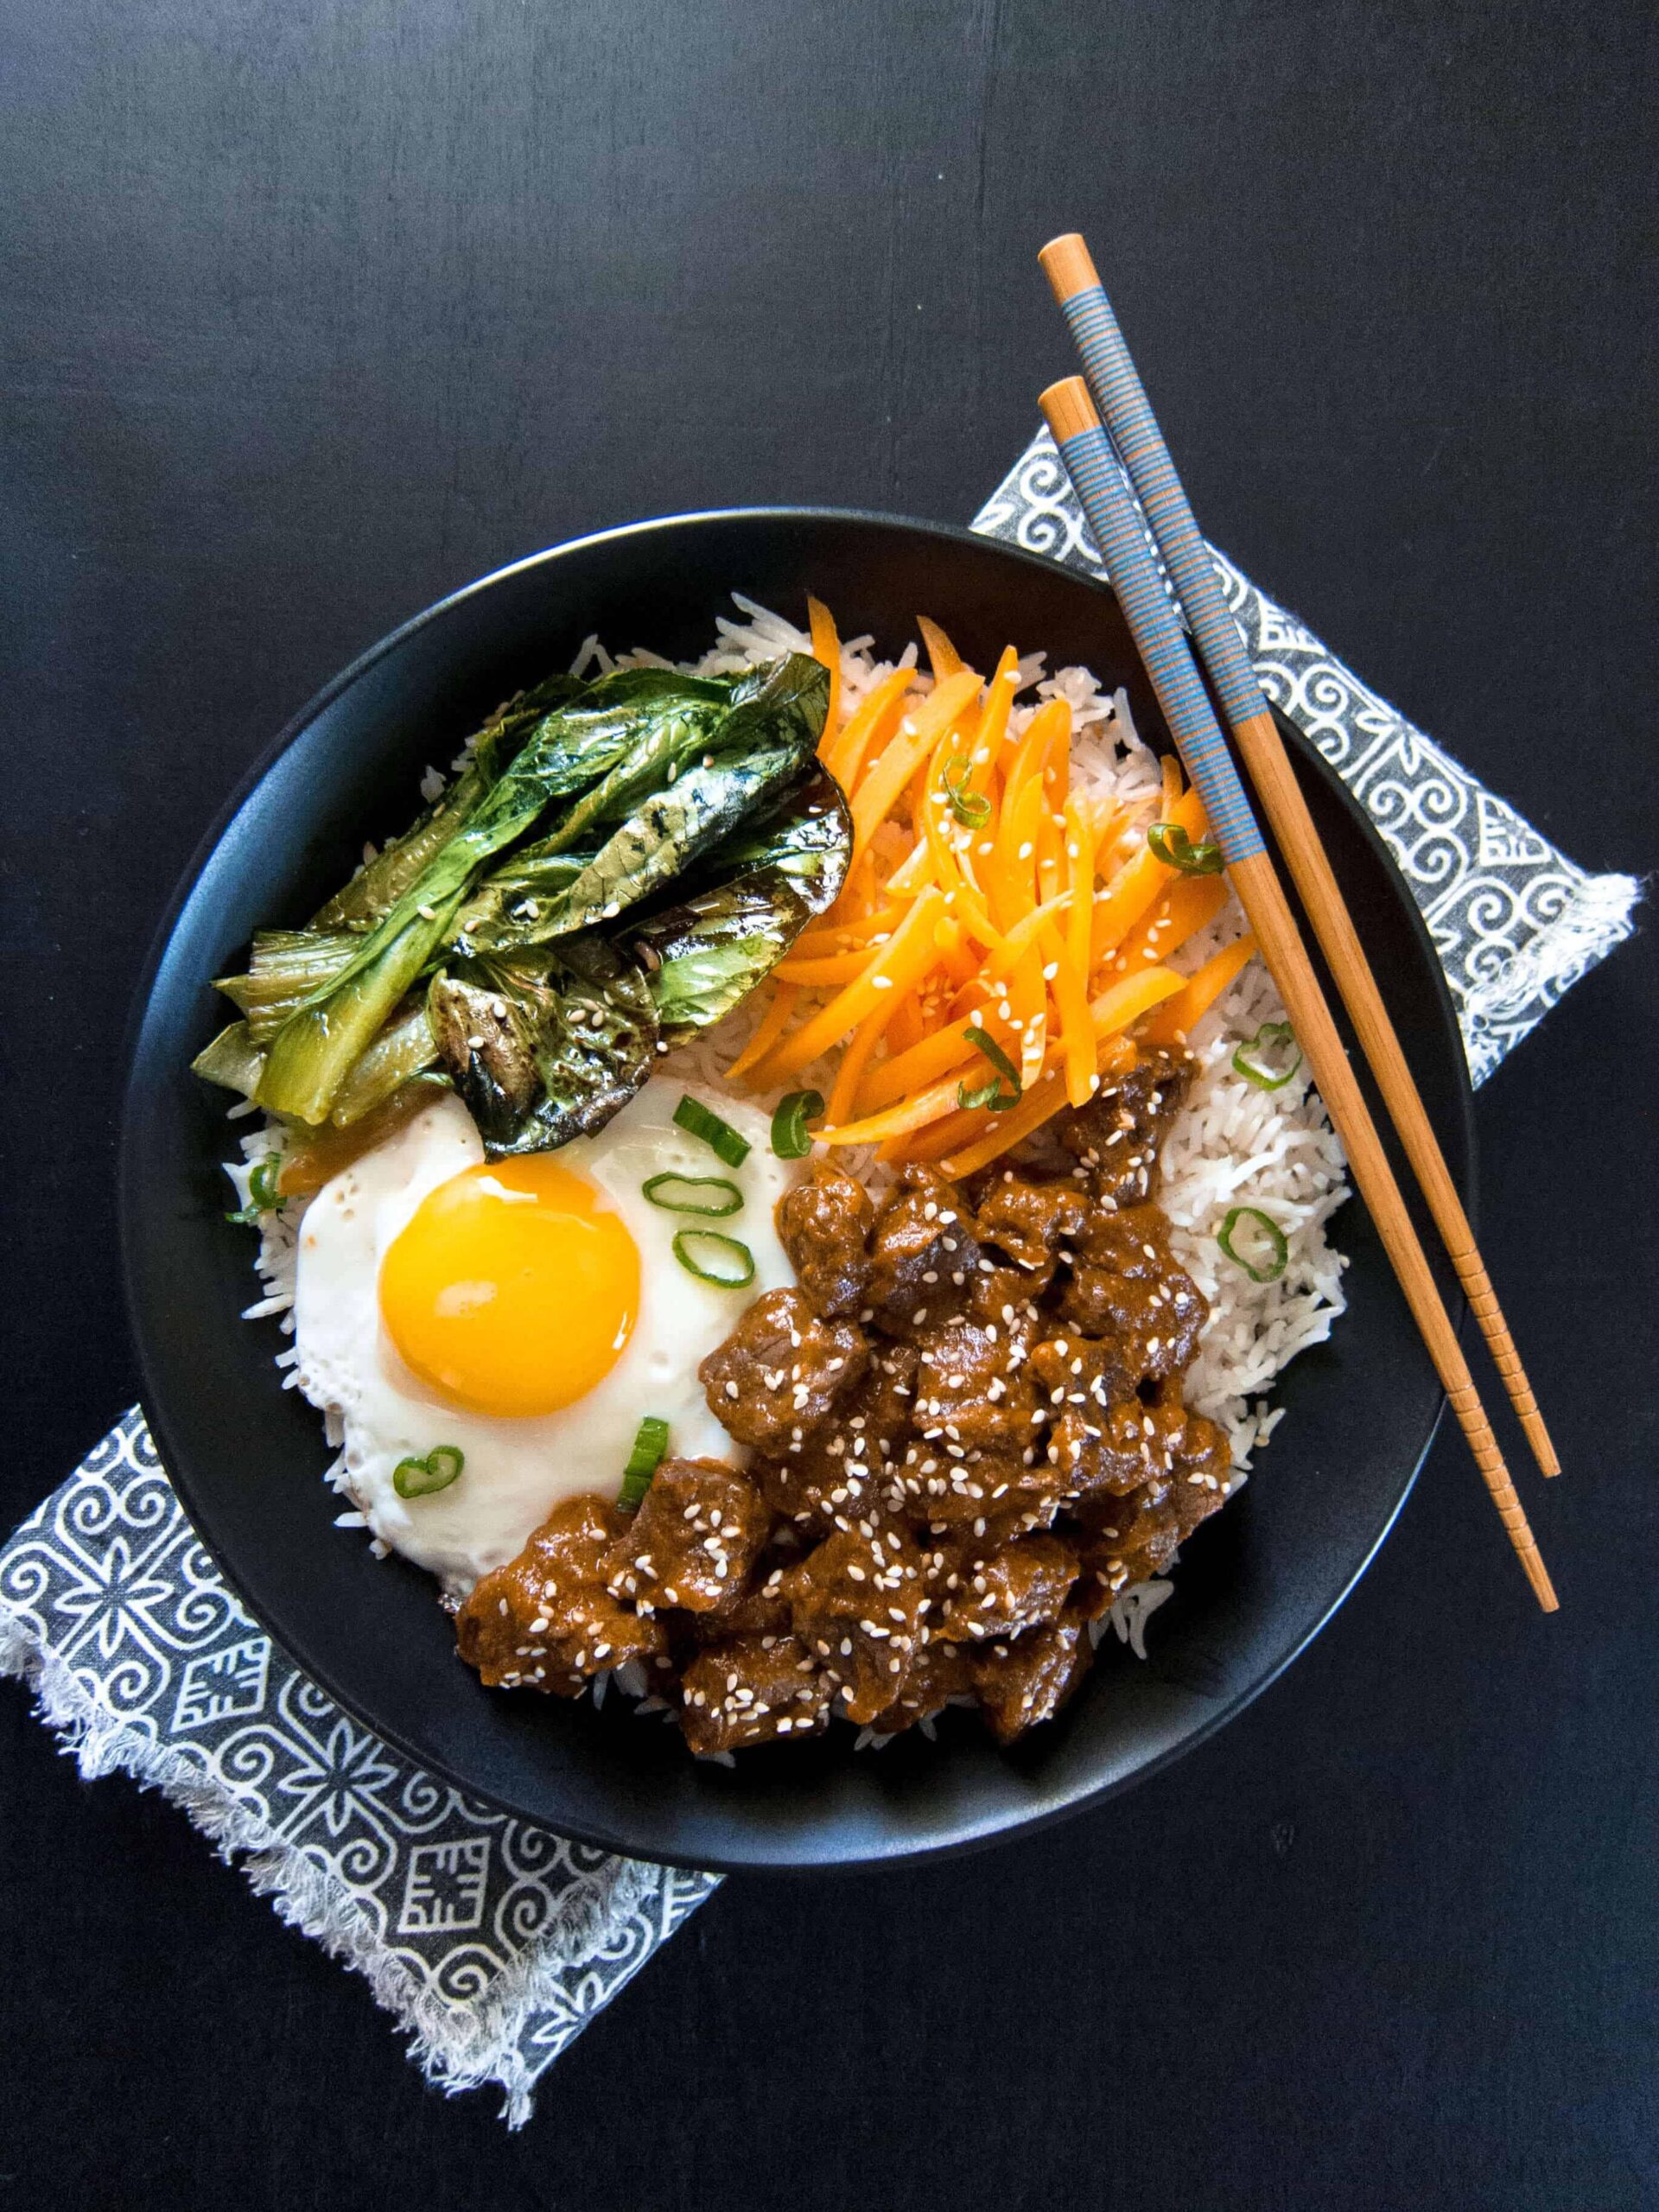  Try this Korean beef on a bed of rice or even in lettuce wraps for a lighter option